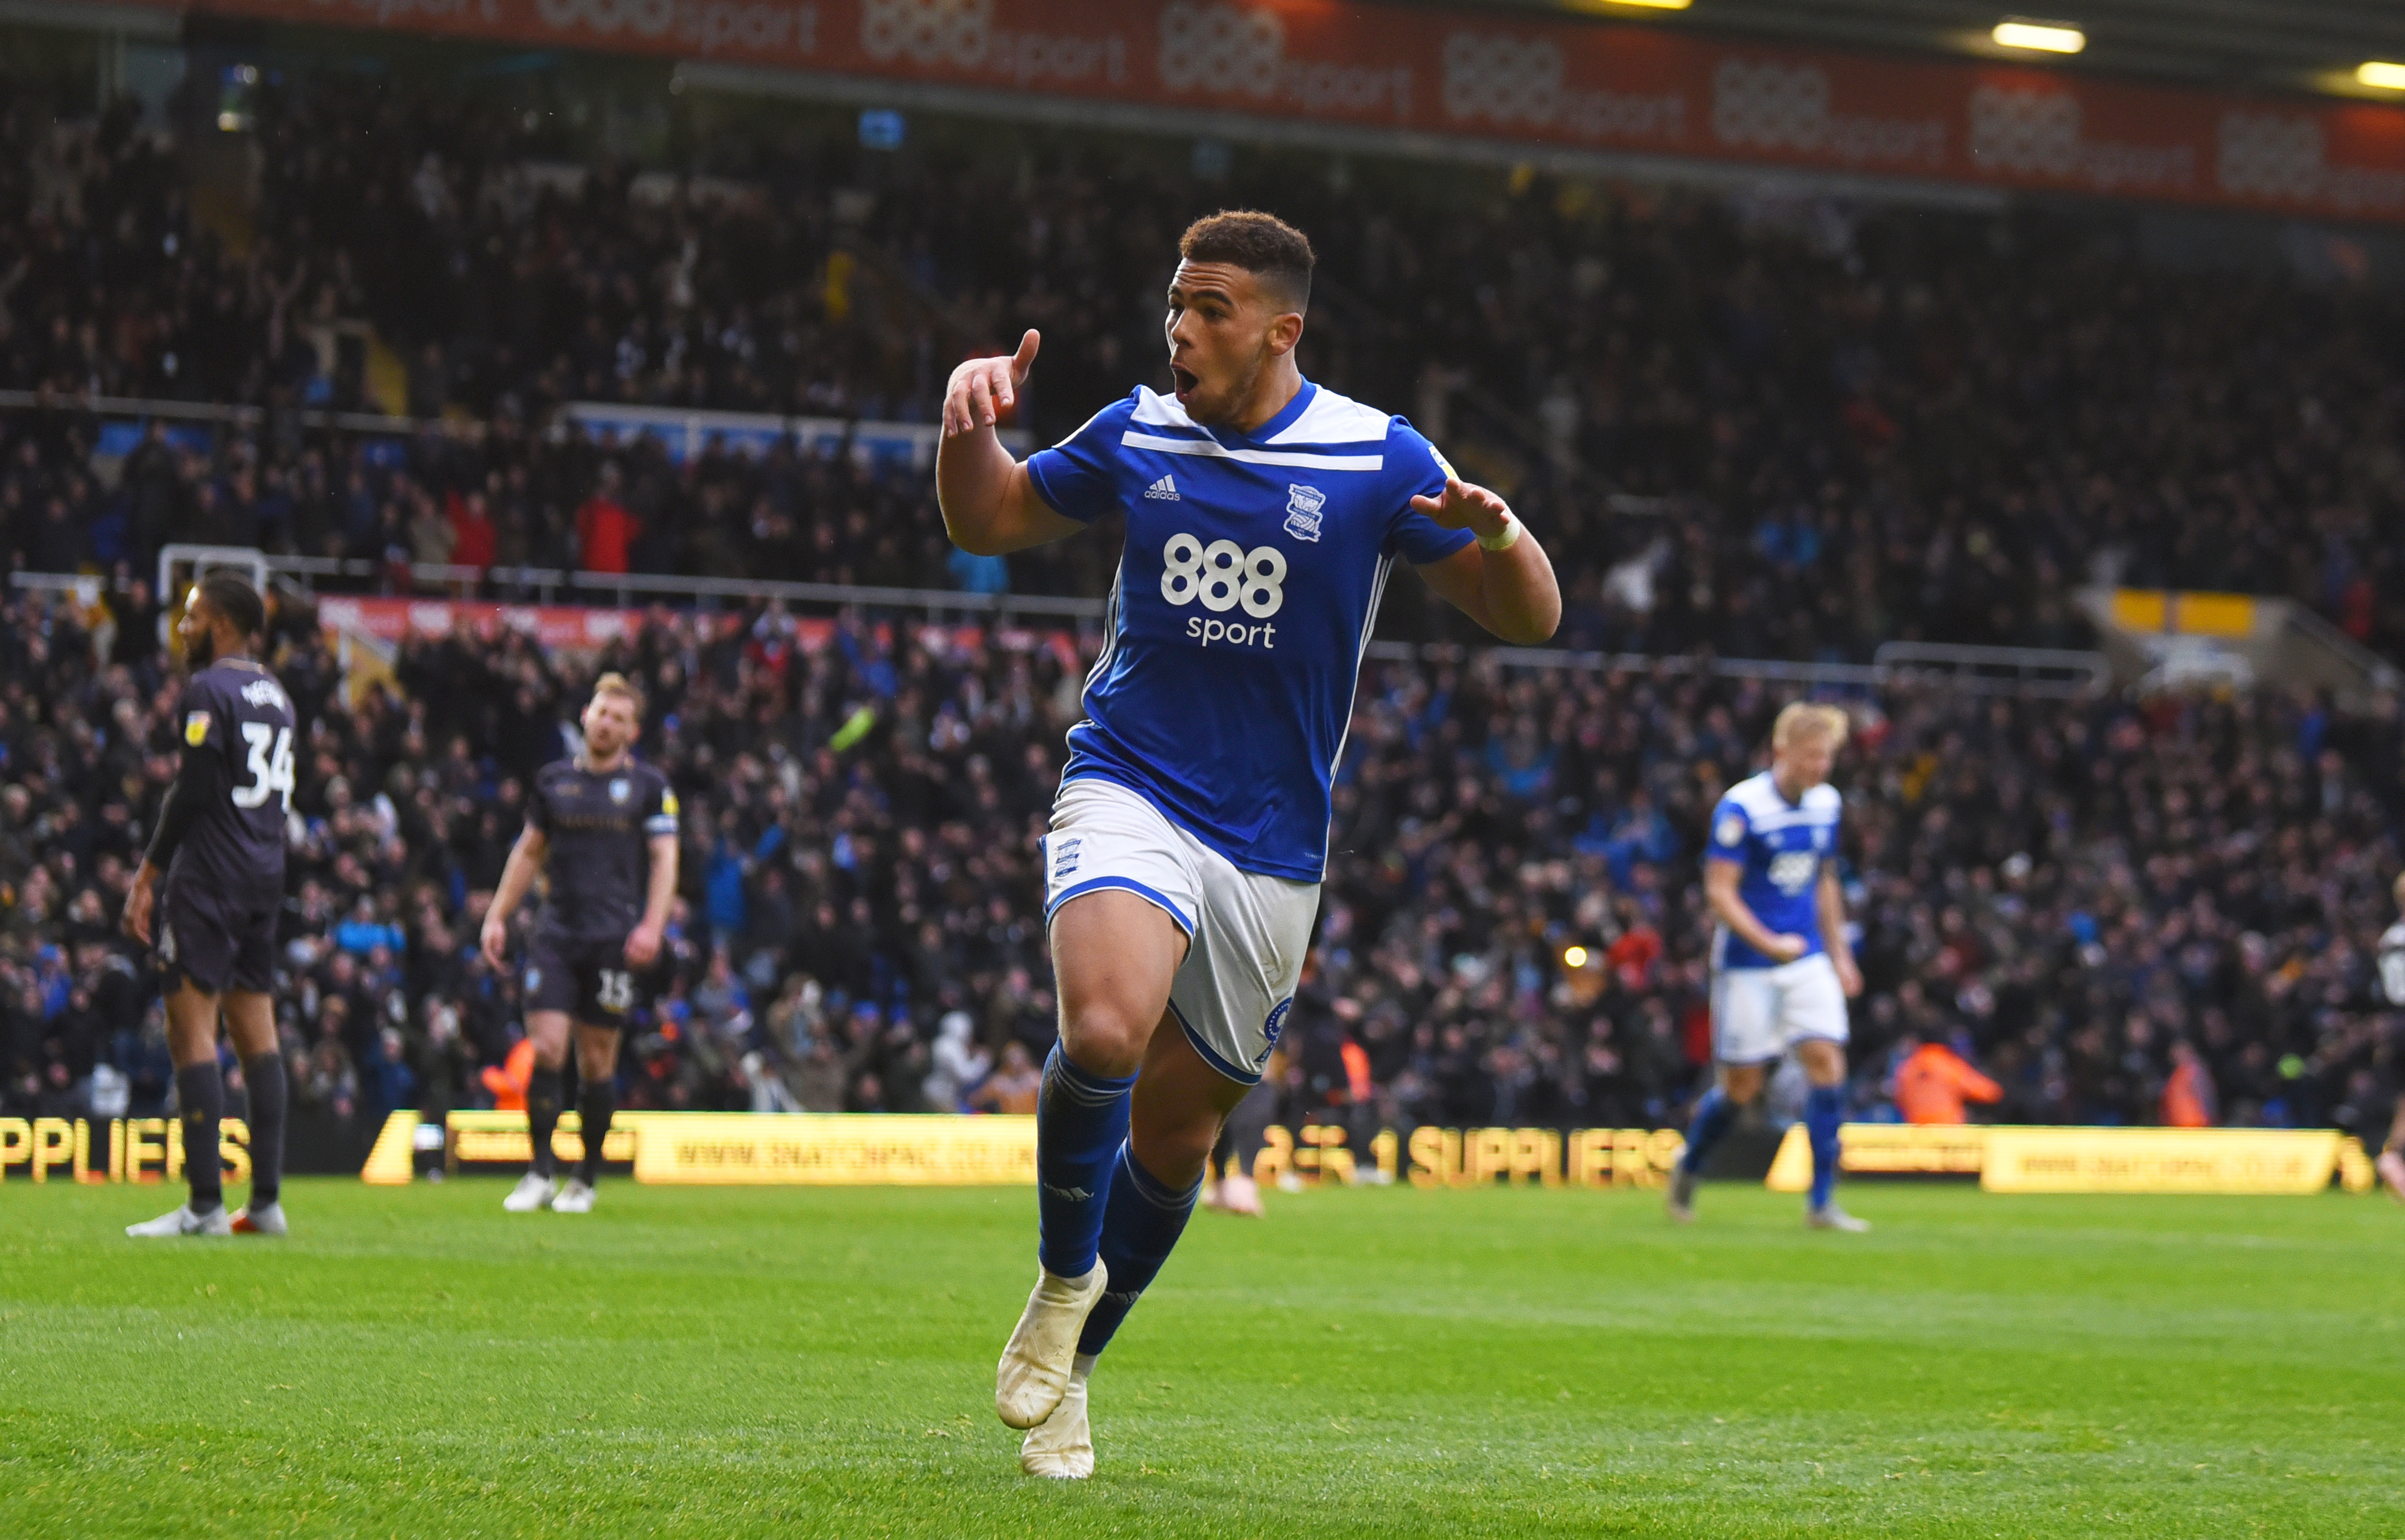 BIRMINGHAM, ENGLAND - OCTOBER 27: Che Adams of Birmingham celebrates as he scores the third goal during the Sky Bet Championship match between Birmingham City and Sheffield Wednesday at St Andrew's Trillion Trophy Stadium on October 27, 2018 in Birmingham, England. (Photo by Nathan Stirk/Getty Images)